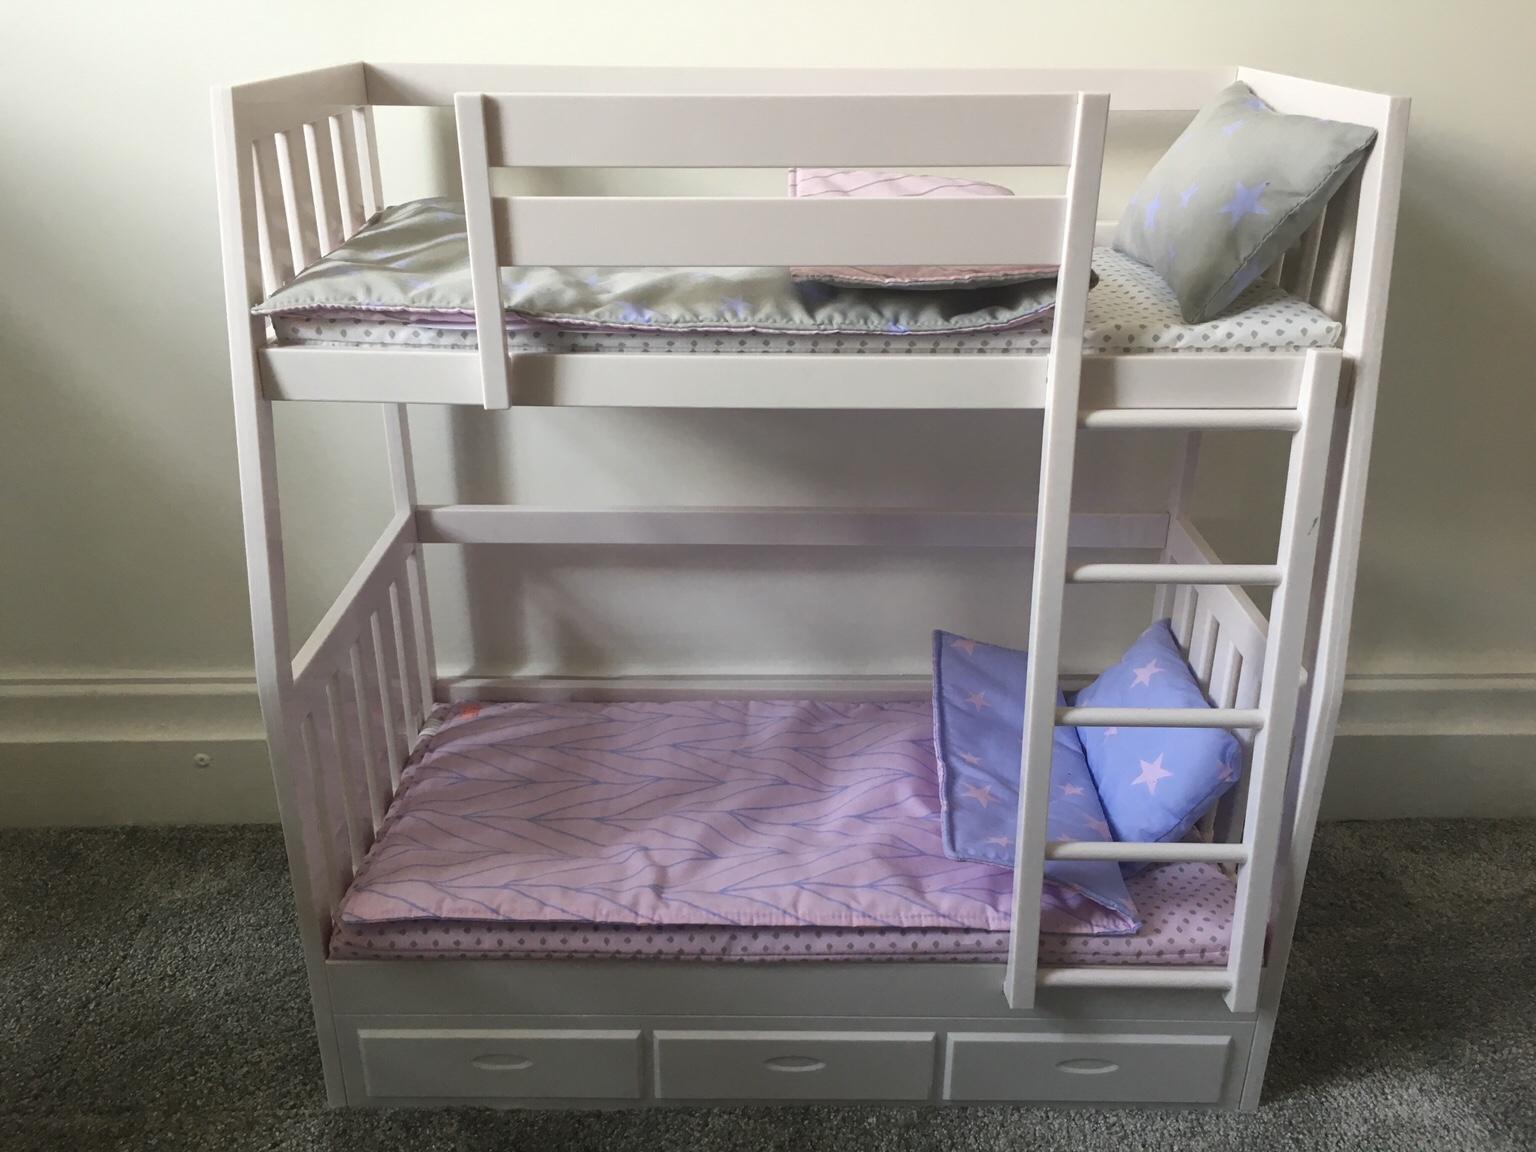 Ajh Our Generation Bunk Bed Smyths, Our Generation Dream Bunk Bed Uk